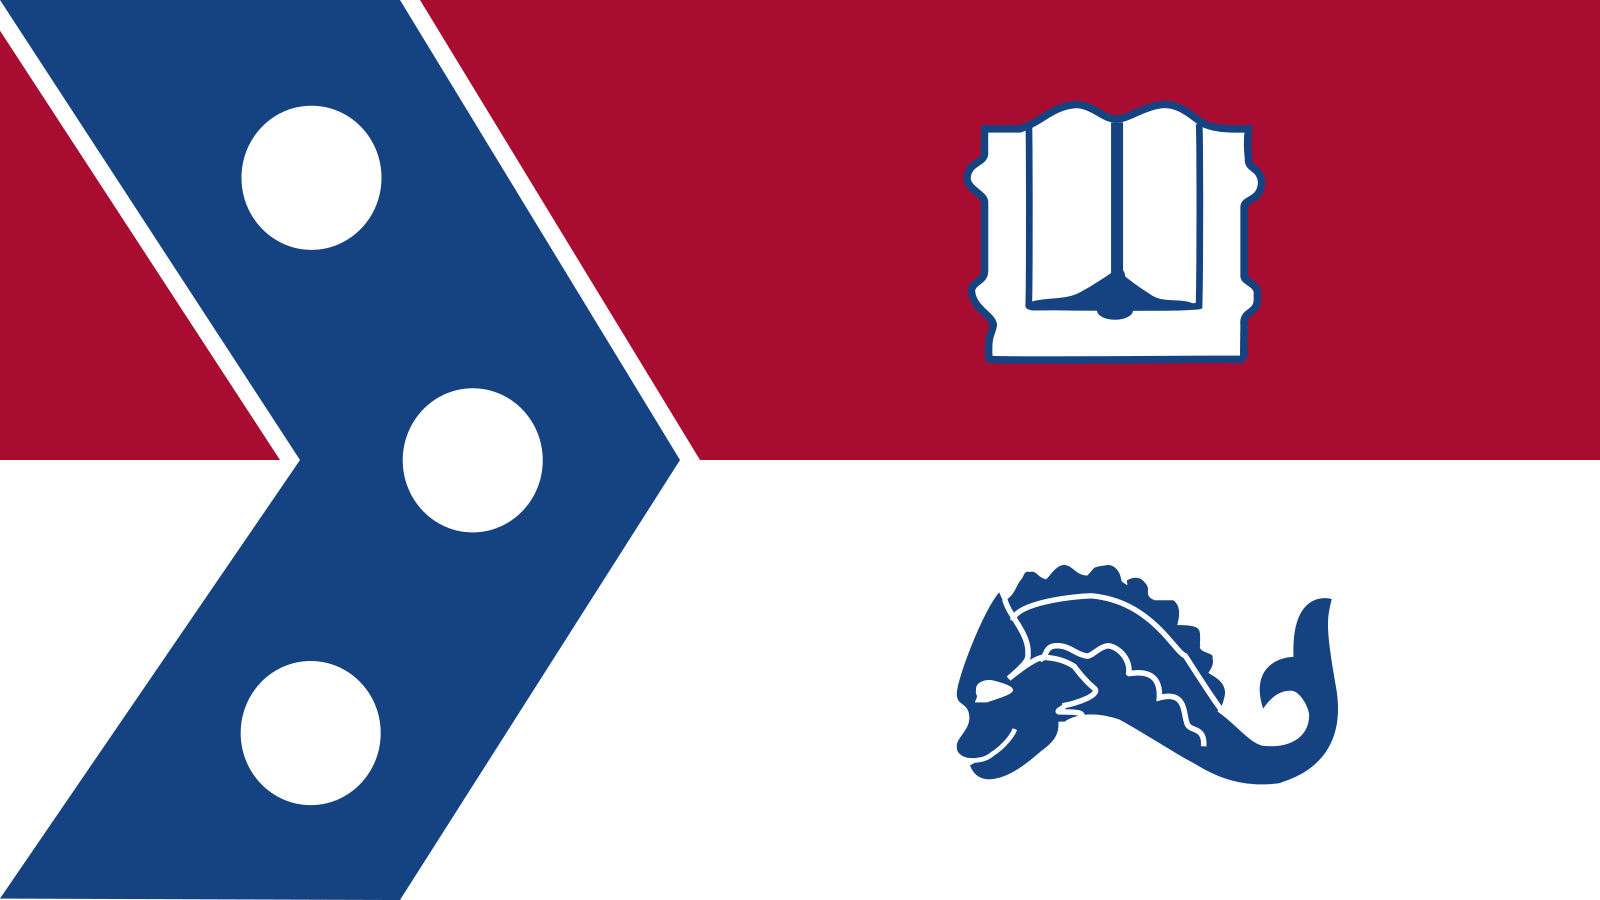 I Made A Flag For The University Of Pennsylvania Vexillology